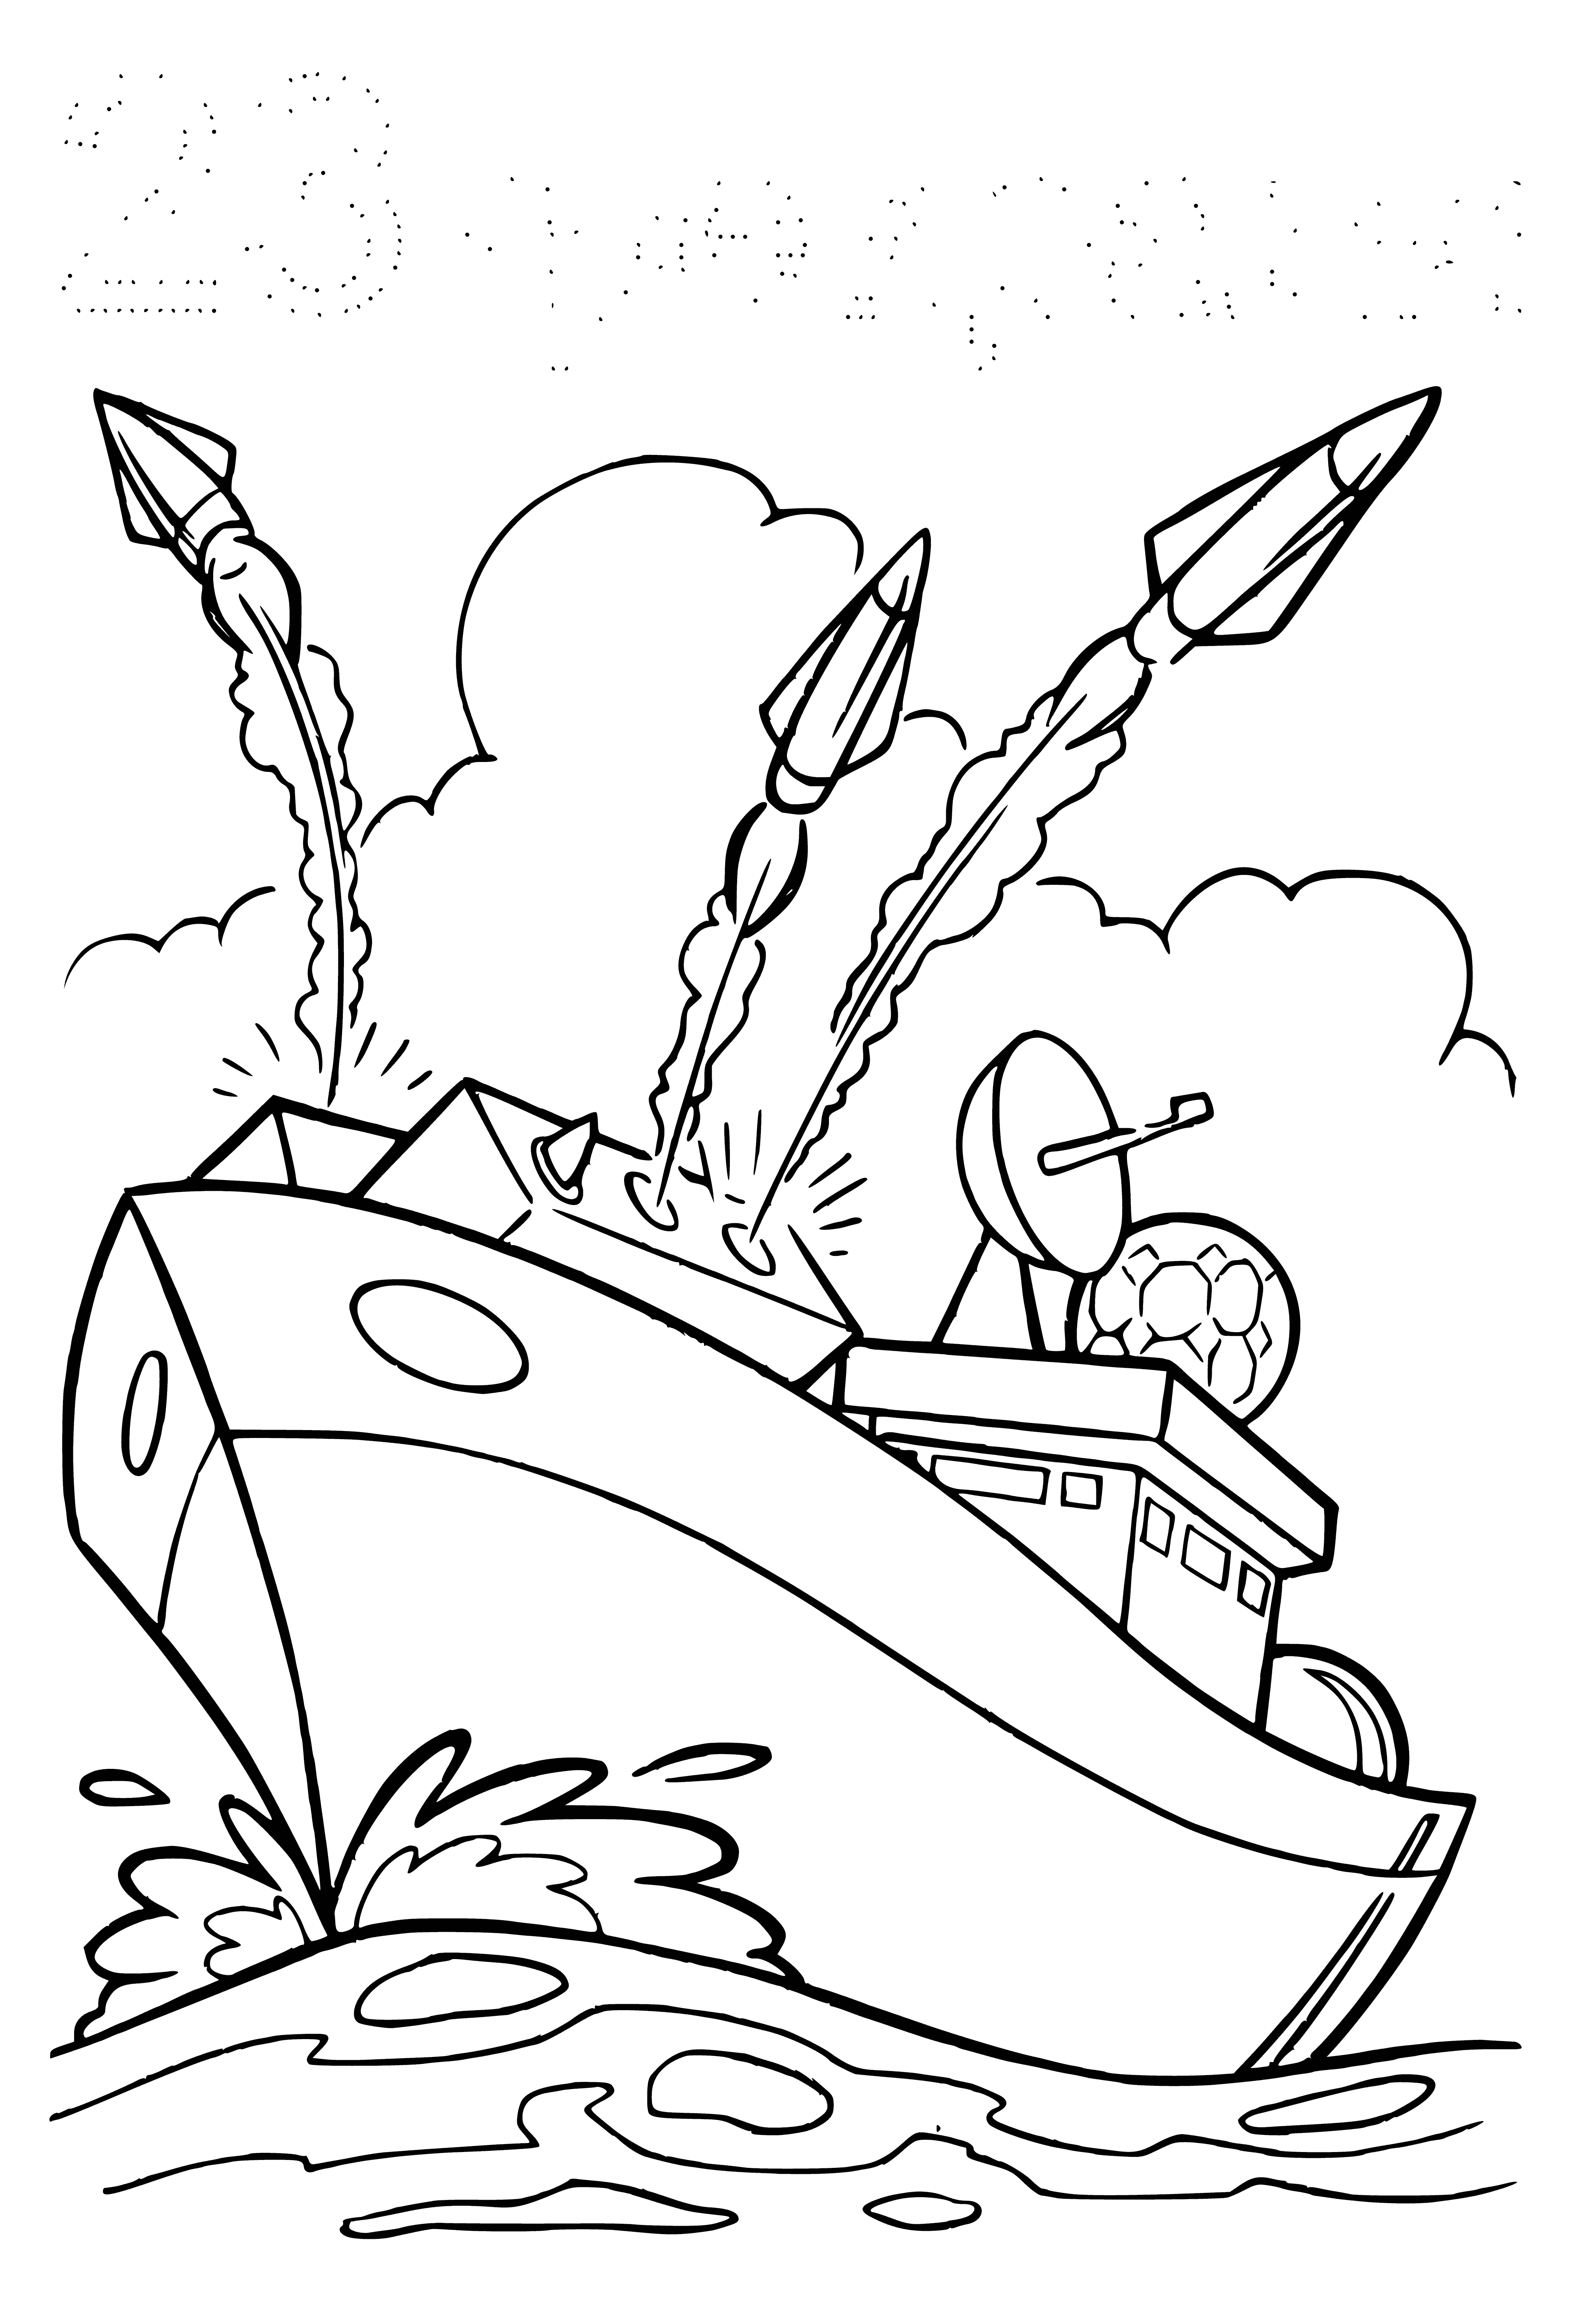 Missile boat coloring page